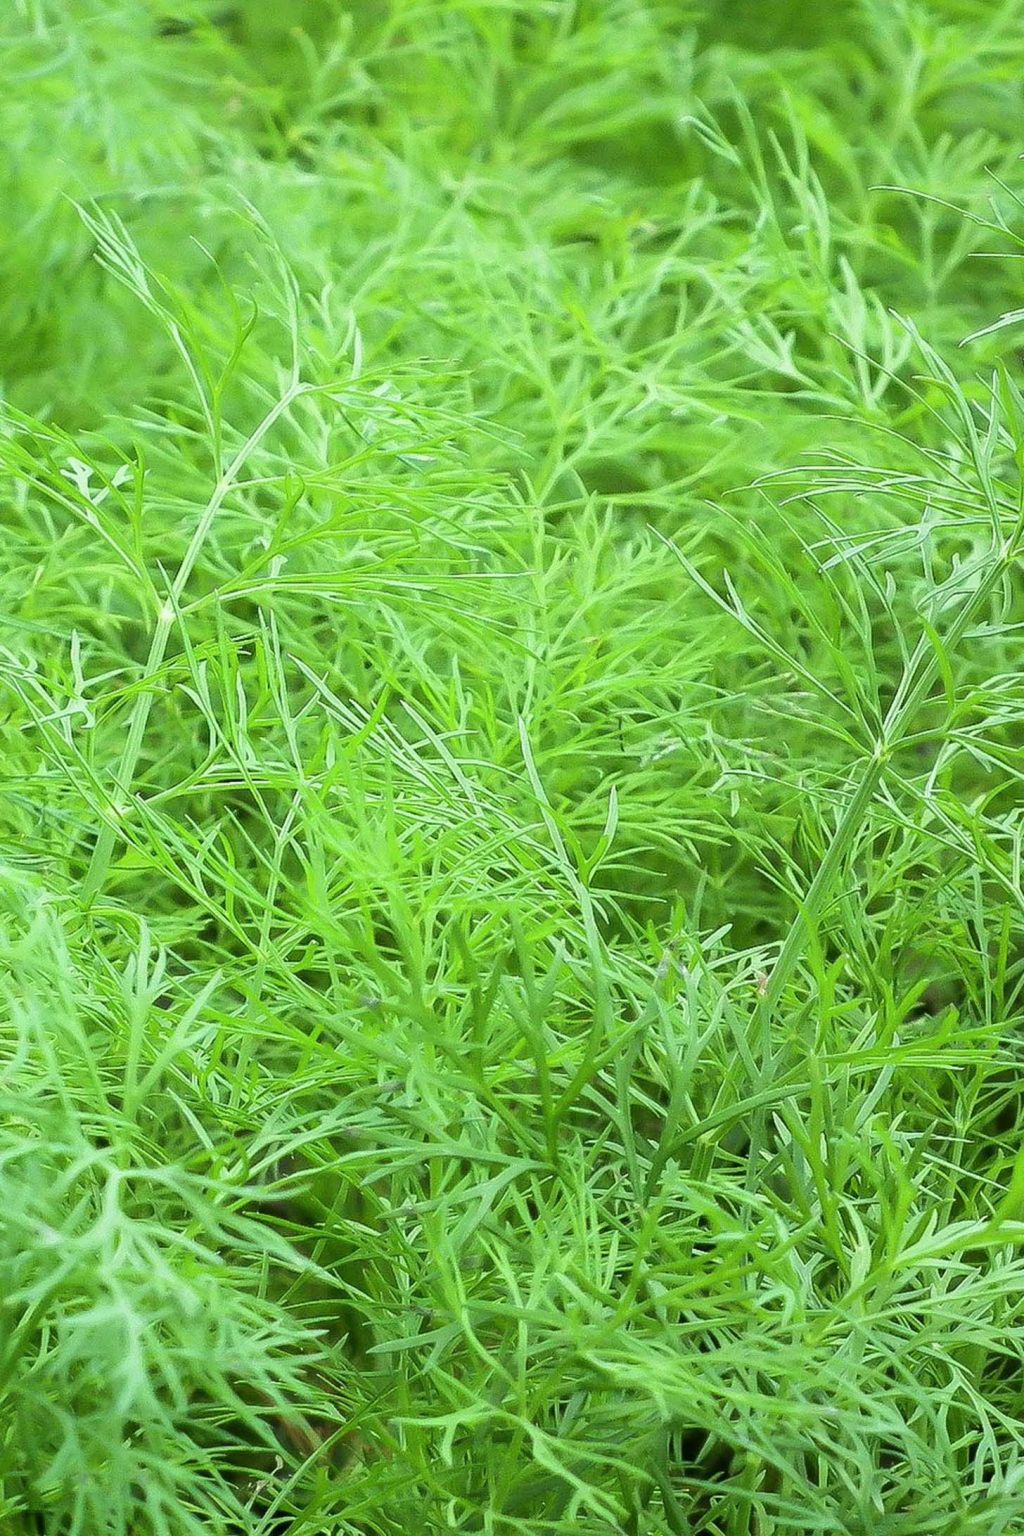 dill weed